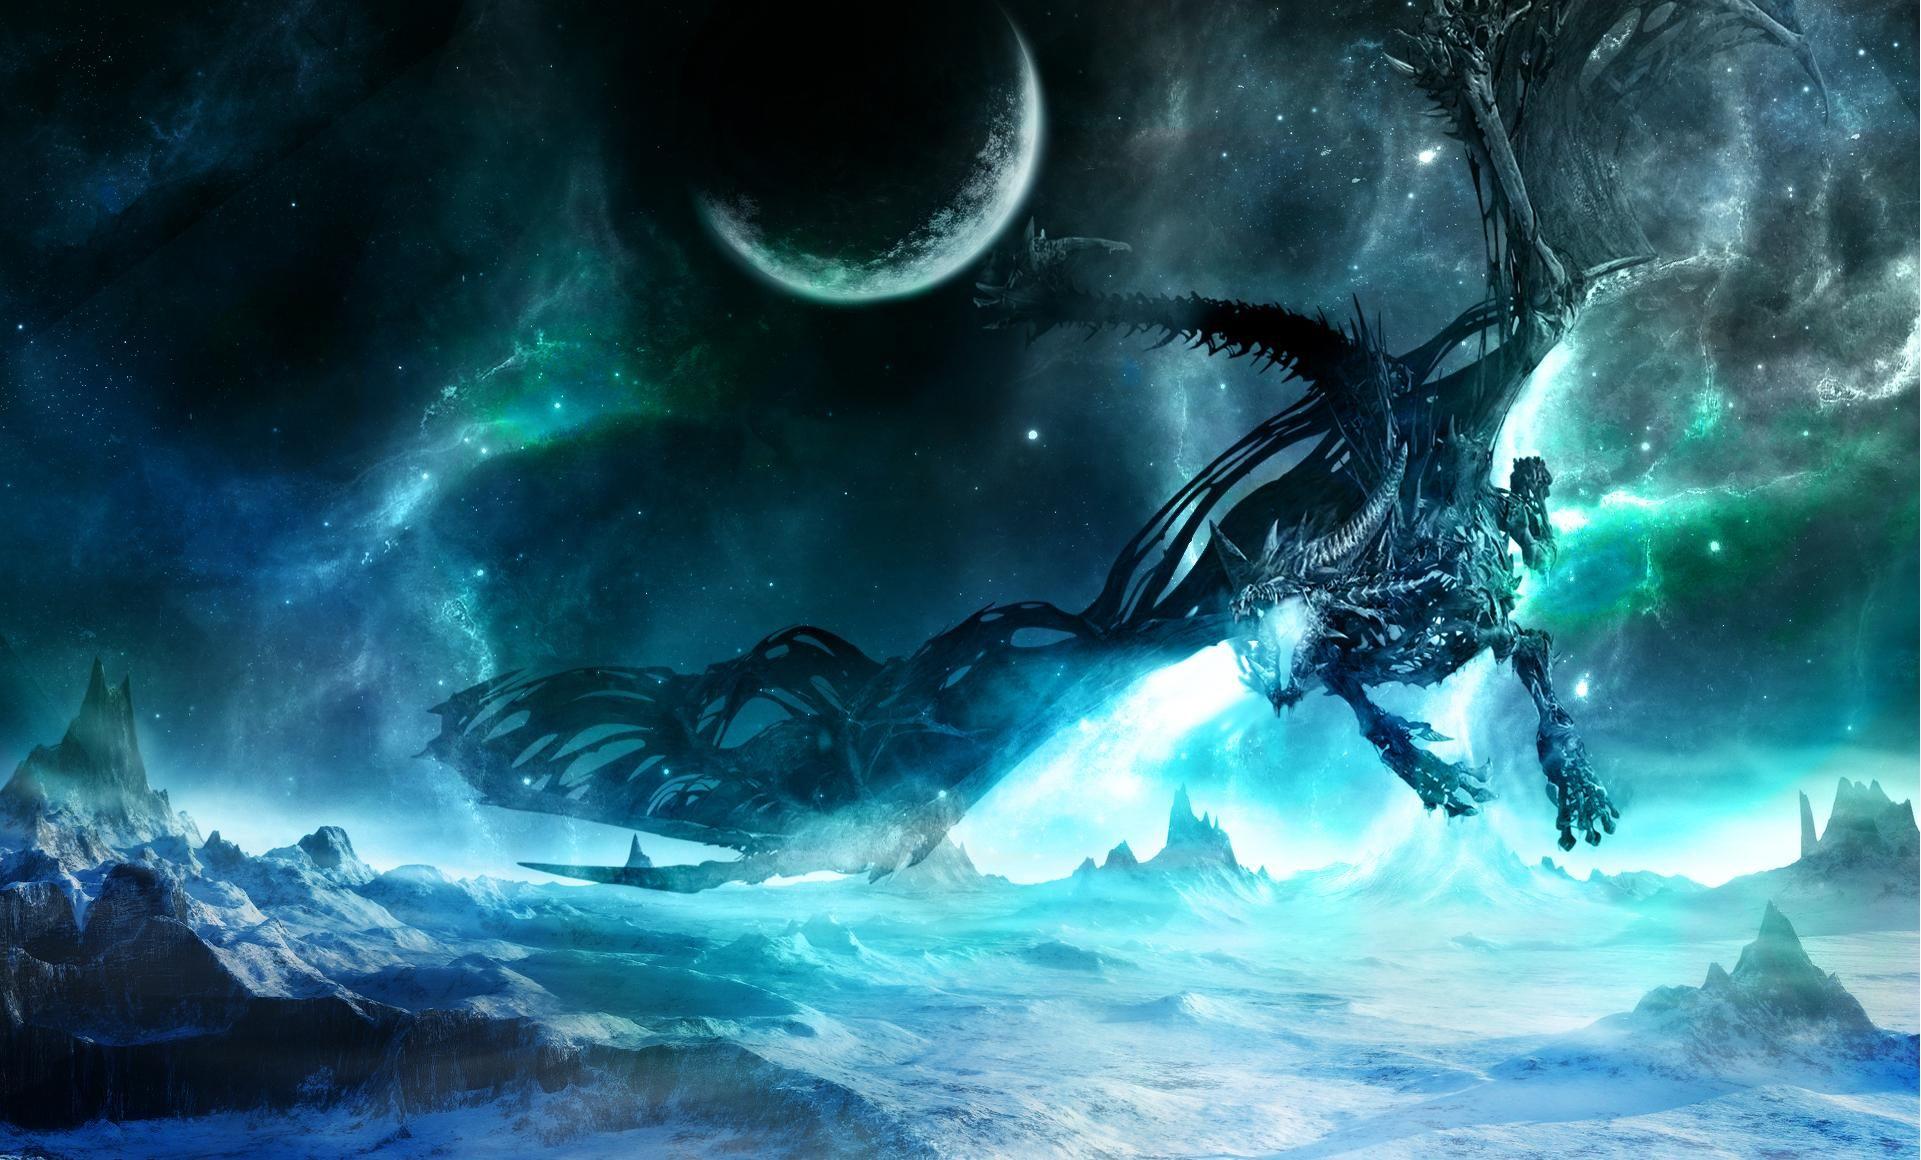 Video Game World Of Warcraft: Wrath Of The Lich King HD Wallpaper